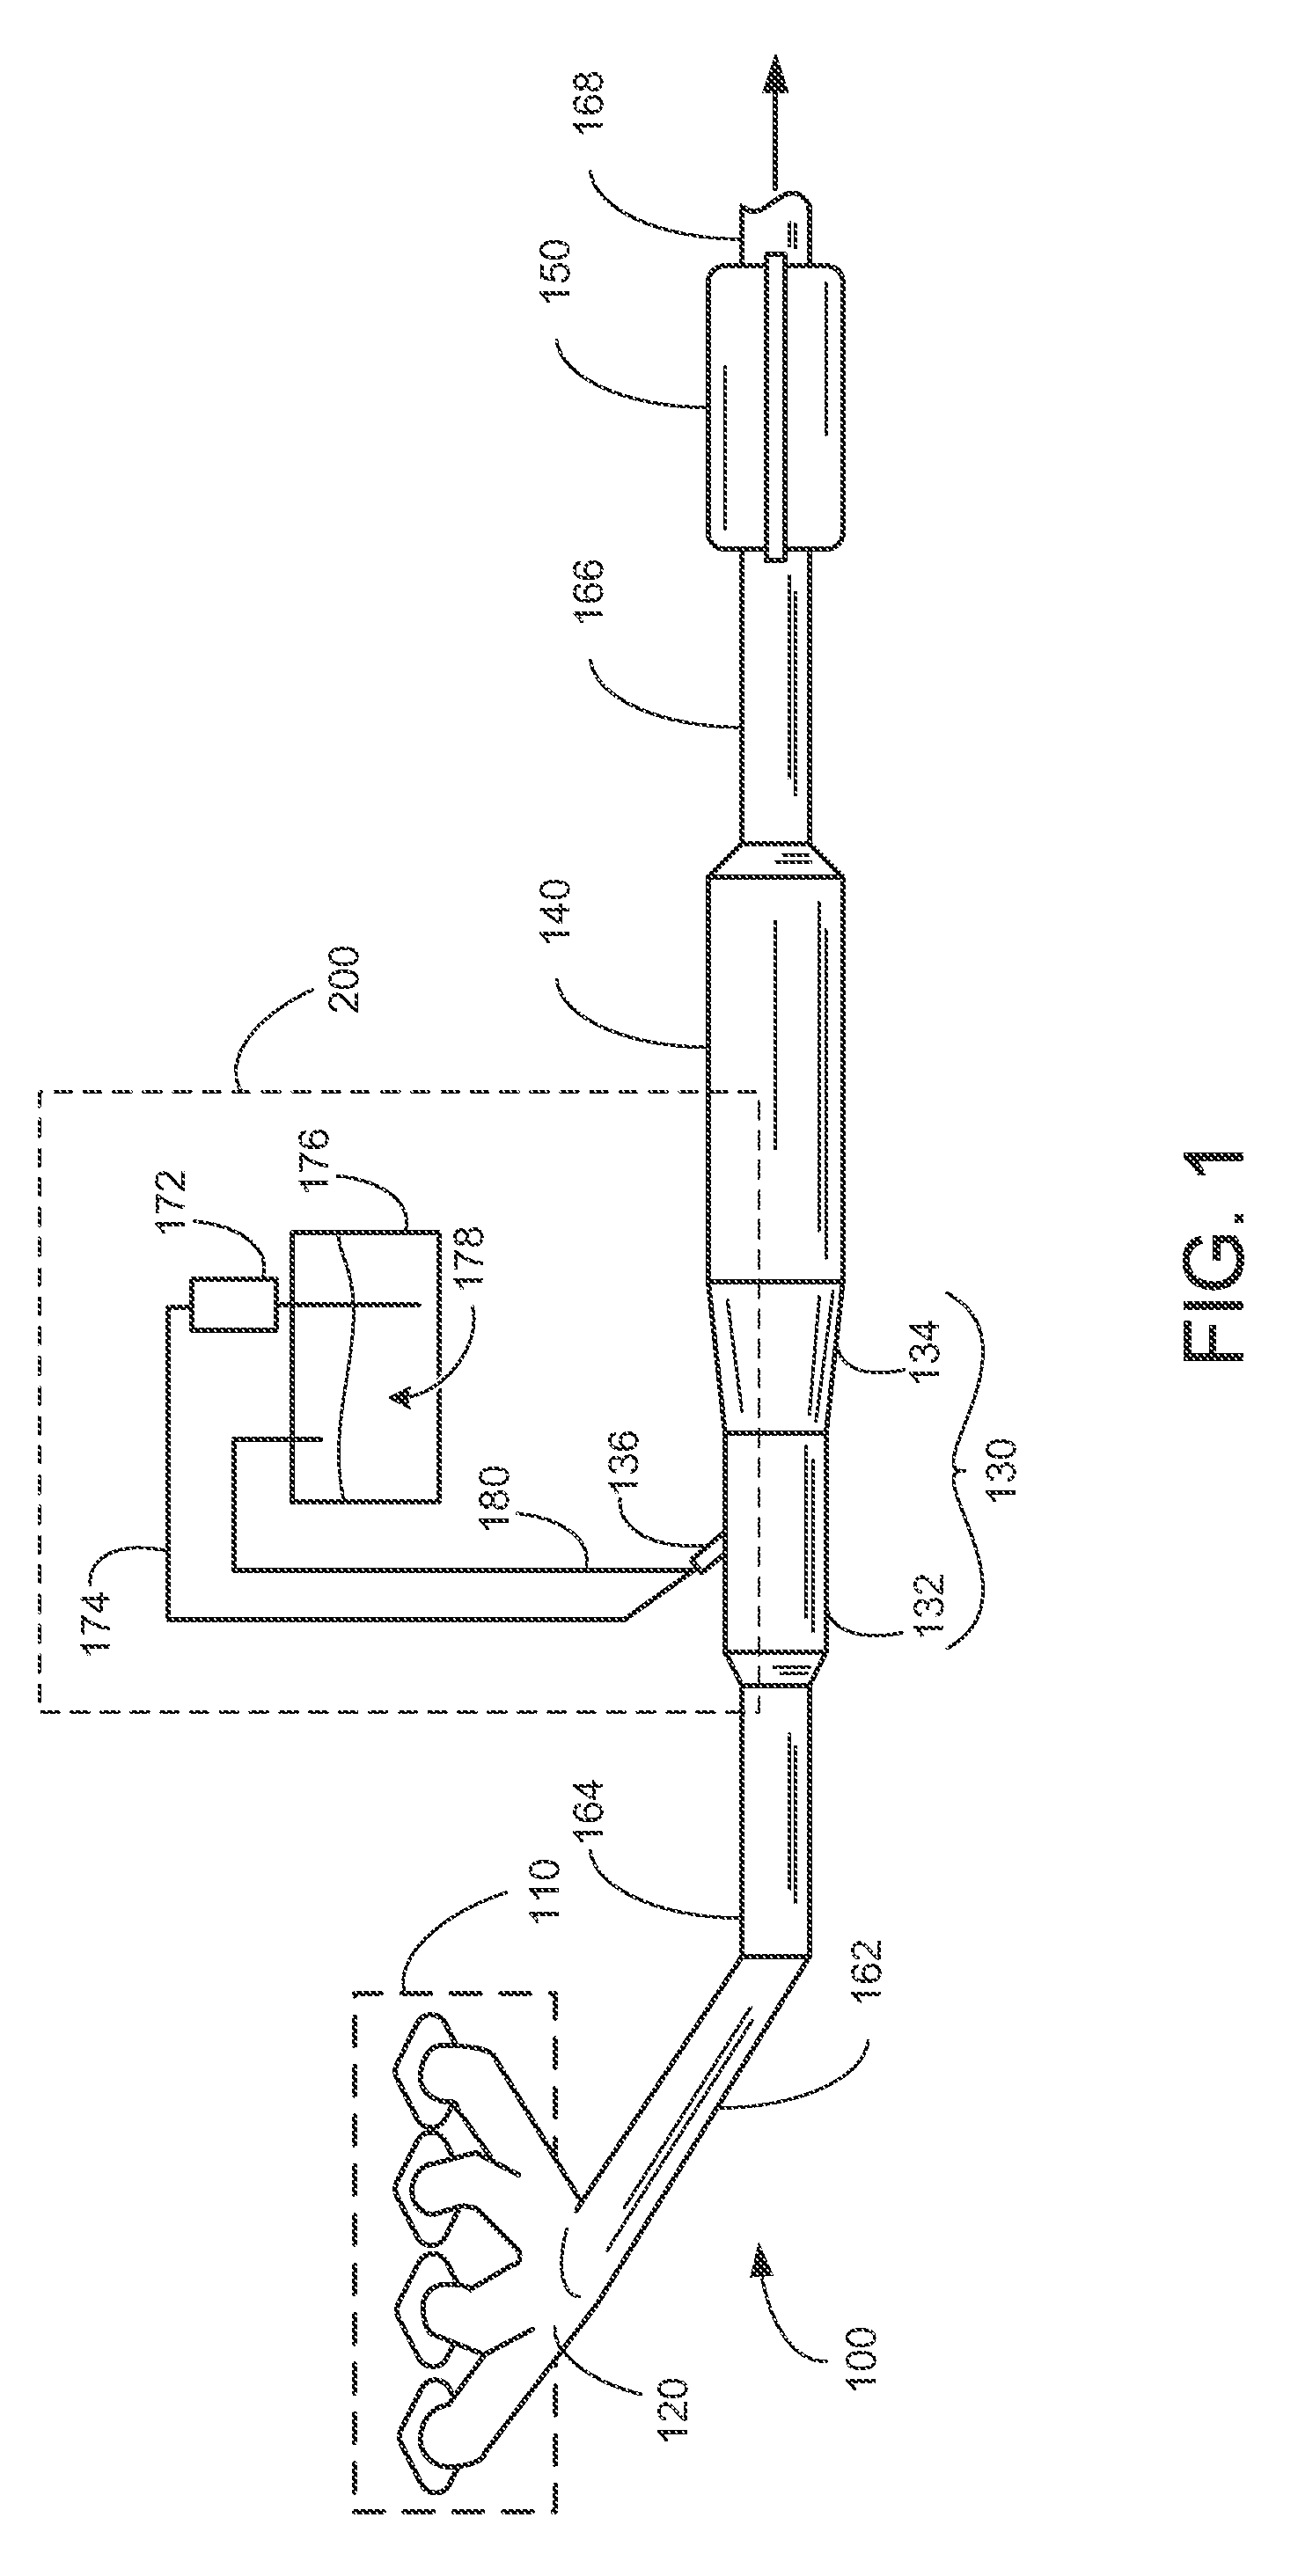 System and method for liquid reductant injection